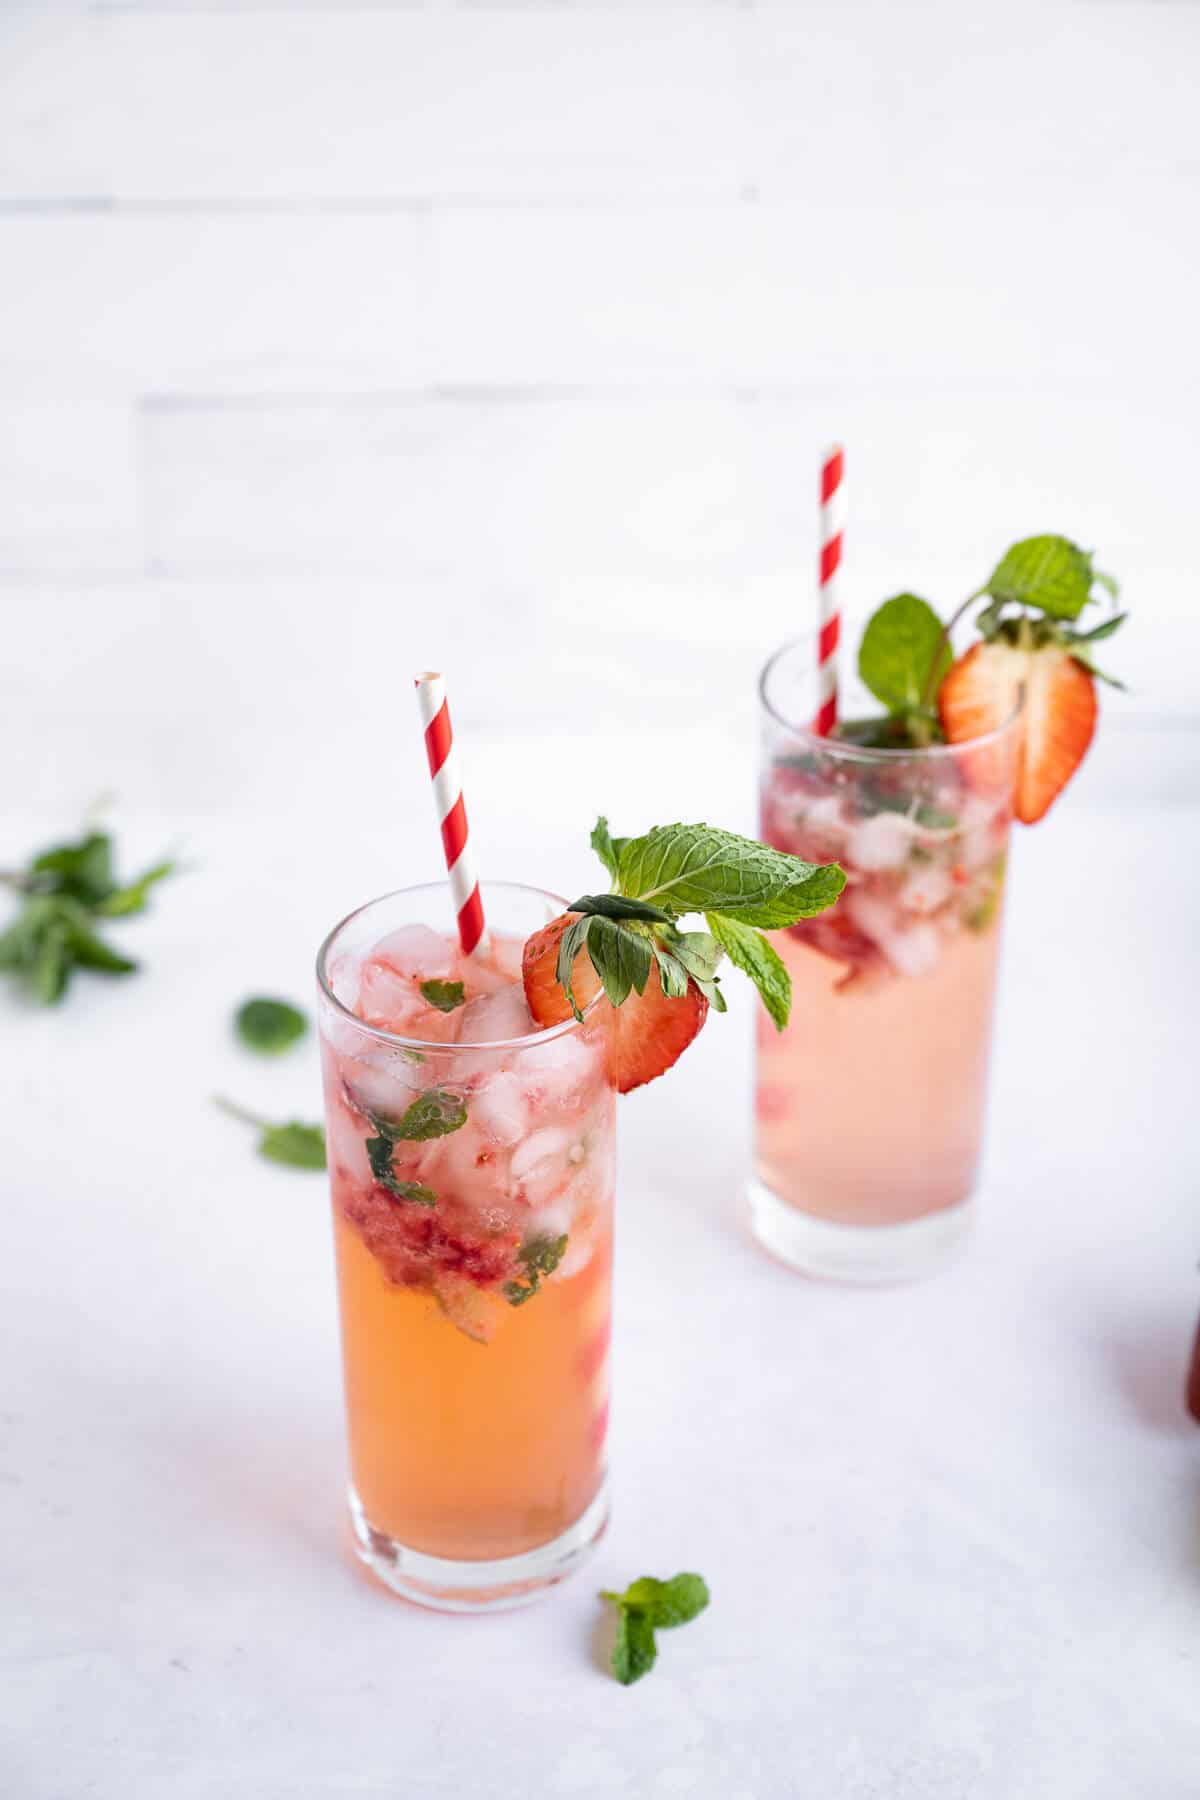 2 glasses of freshly made strawberry mojito mocktails. Drinks are garnished with fresh mint leaves and sliced strawberries. Each glass has a red and white striped straw in it.